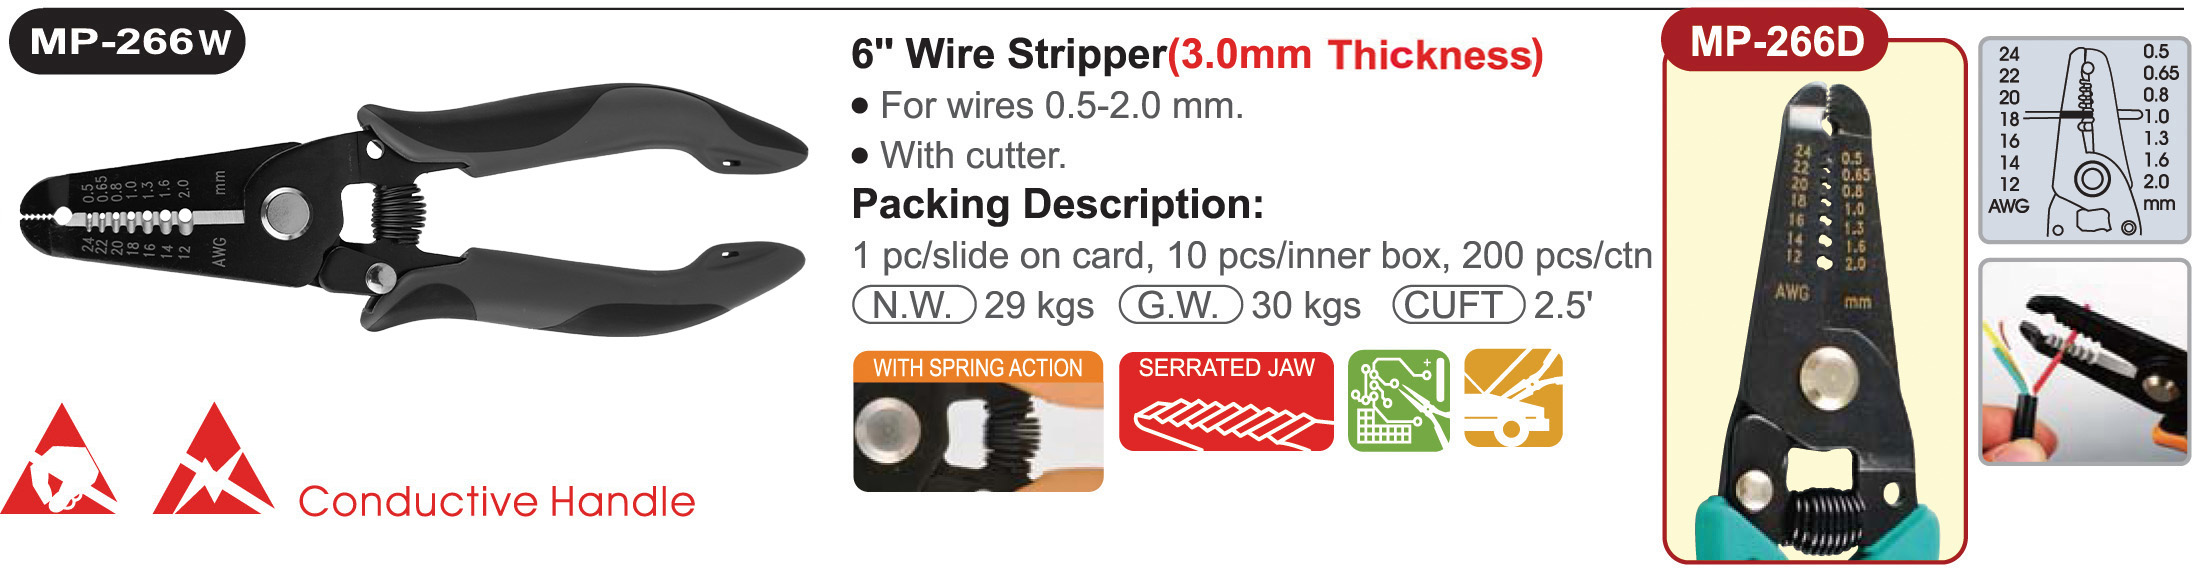 proimages/product/pliers/wire_strippers/ELECTRONICS_WIRE_STRIPPER_ESD/MP-266W/MP-266W.jpg